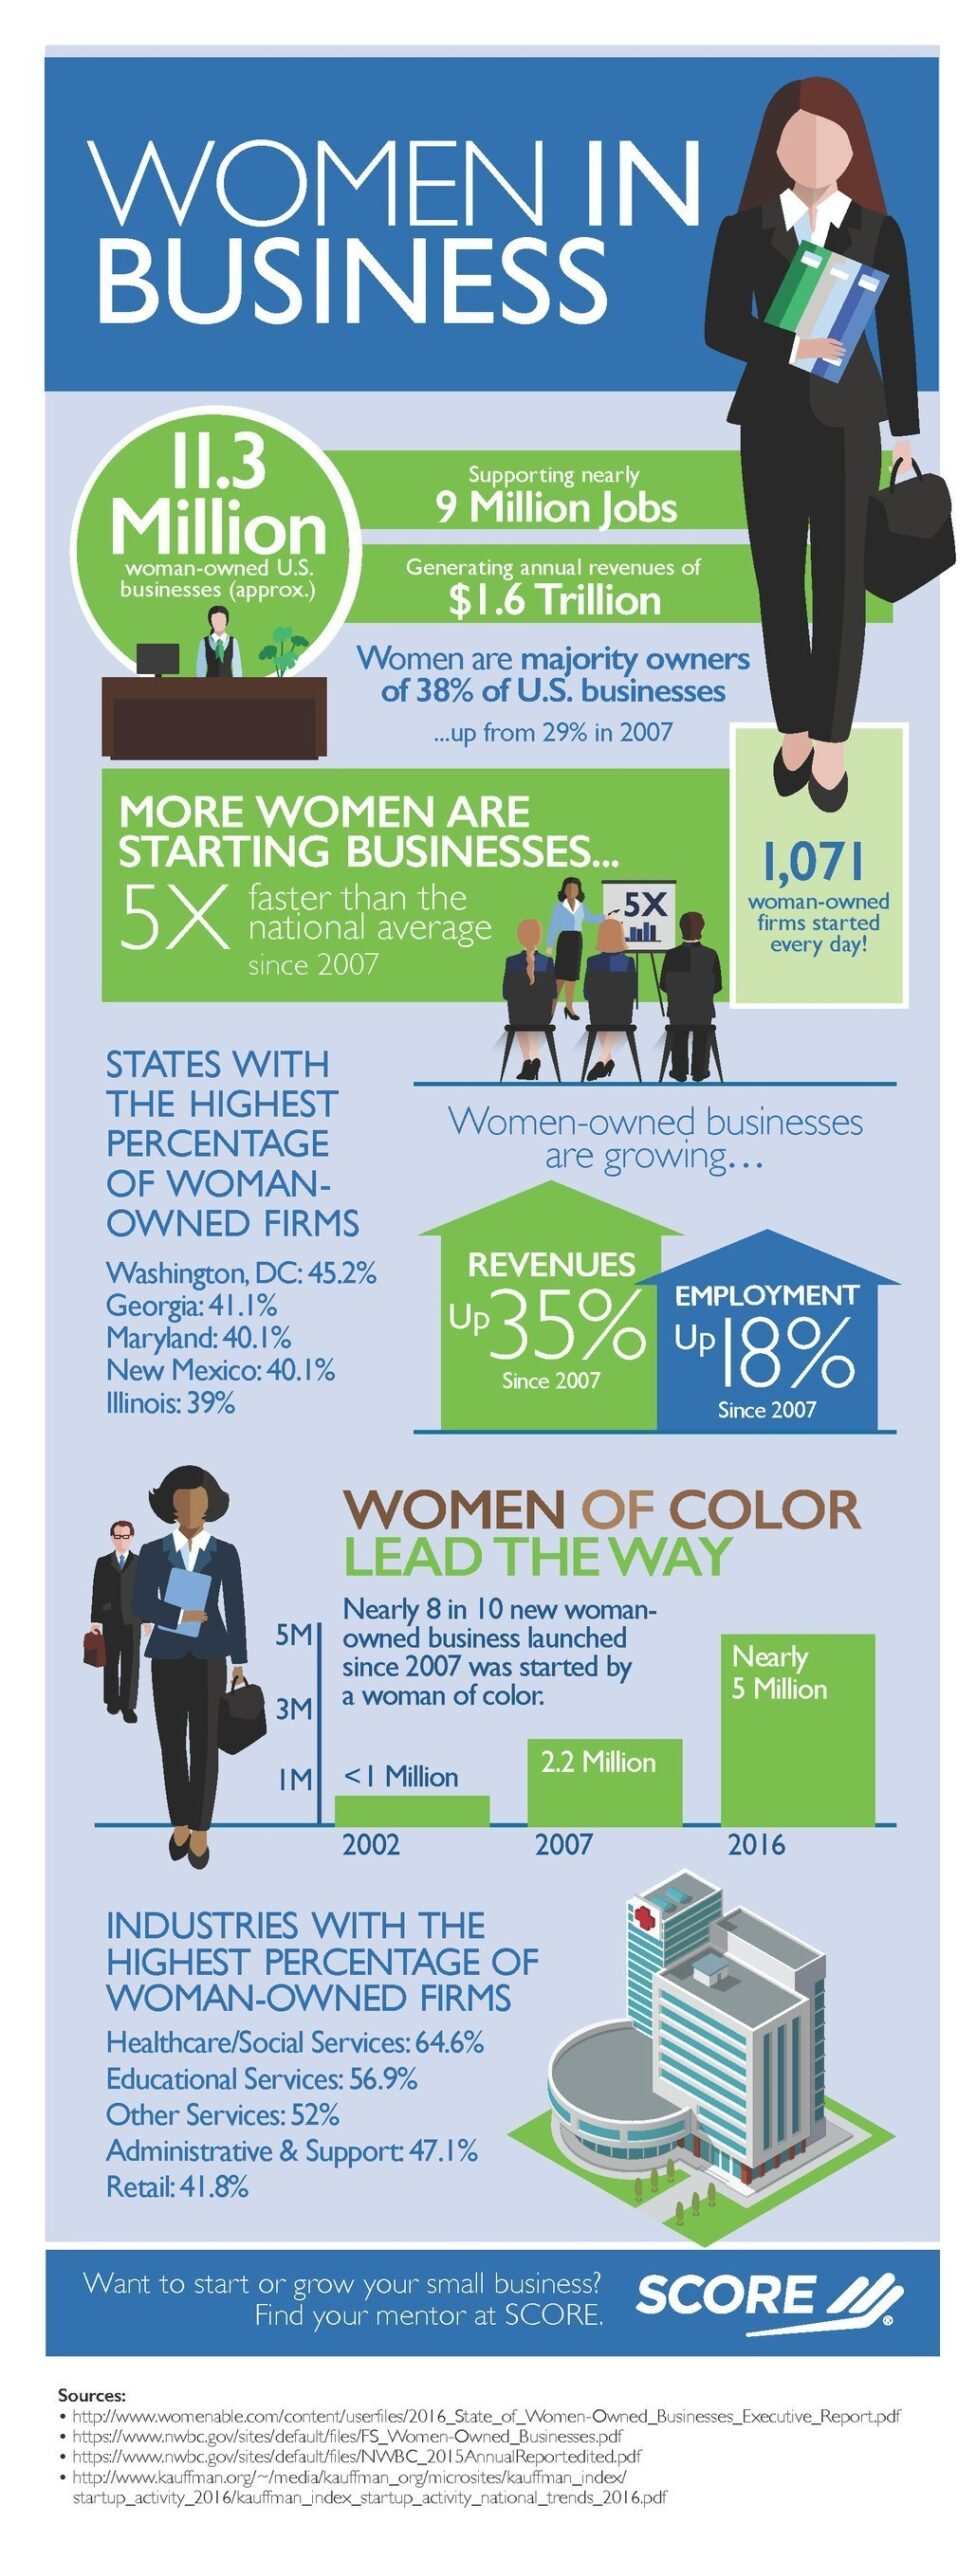 Small Business Infographic | Visual.ly